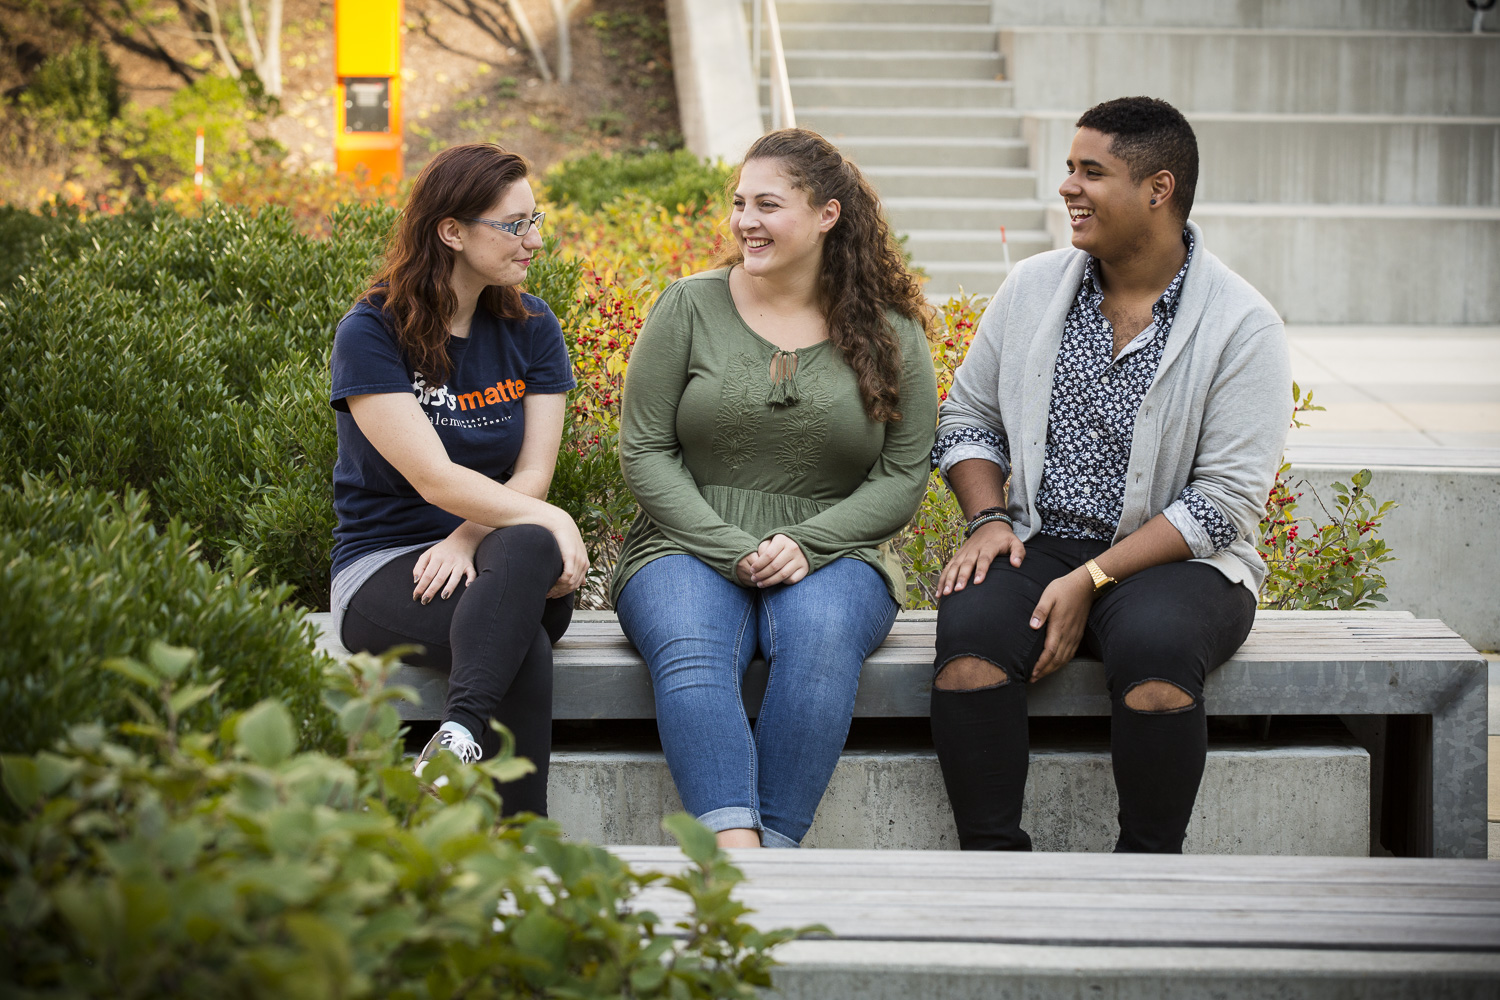 Accepted Students Day 2019 at Salem State University, Sunday, March 31, 2019